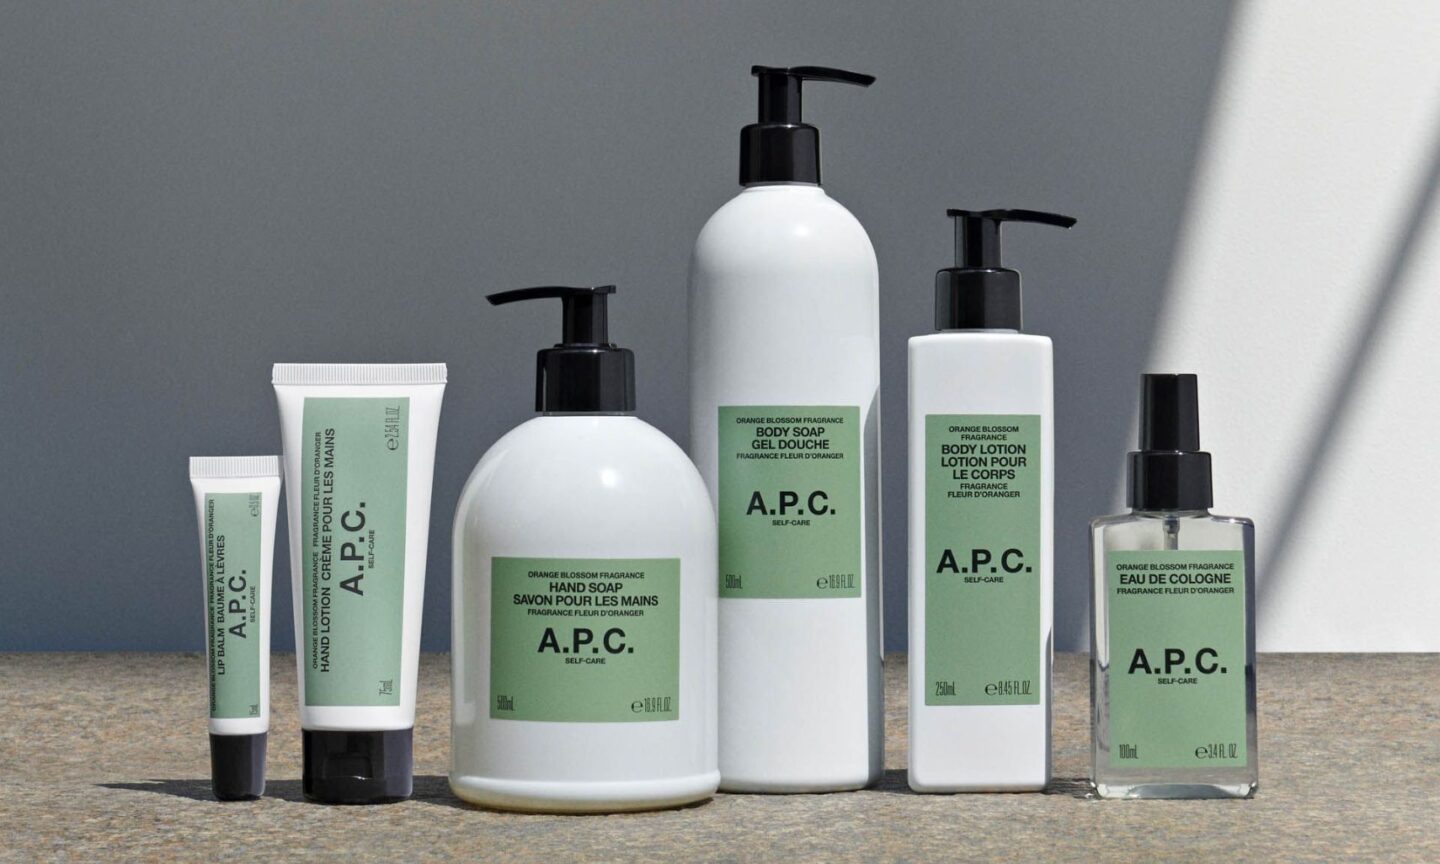 A.P.C. beauty products